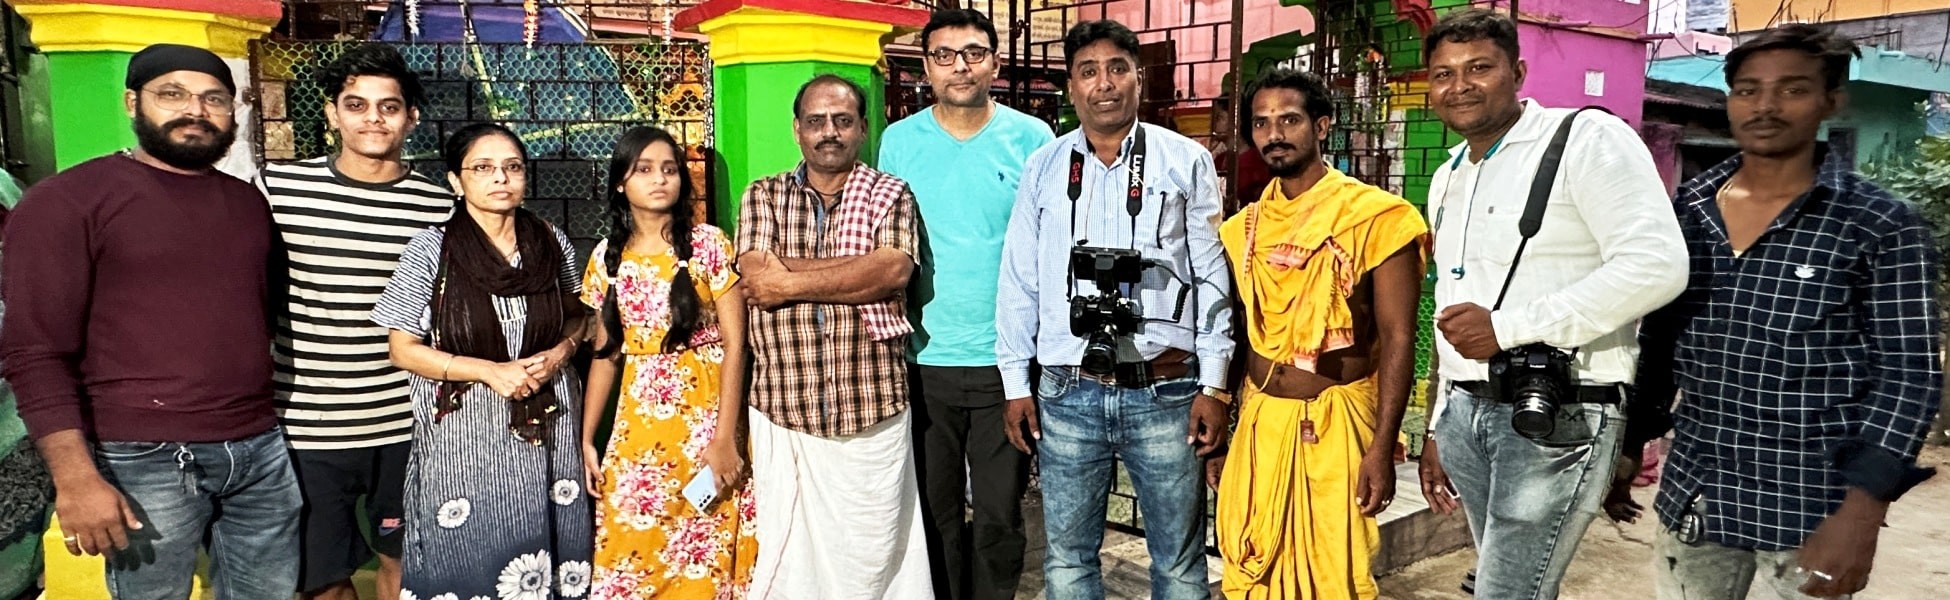 film shooting locations in india, film shooting locations in assam, film shooting locations in guwahati, video shooting locations in india, video shooting locations in assam, video shooting locations in guwahati, tv shooting locations in india, tv shooting locations in assam, tv shooting locations in guwahati, shooting locations in india, shooting locations in assam, shooting locations in guwahati